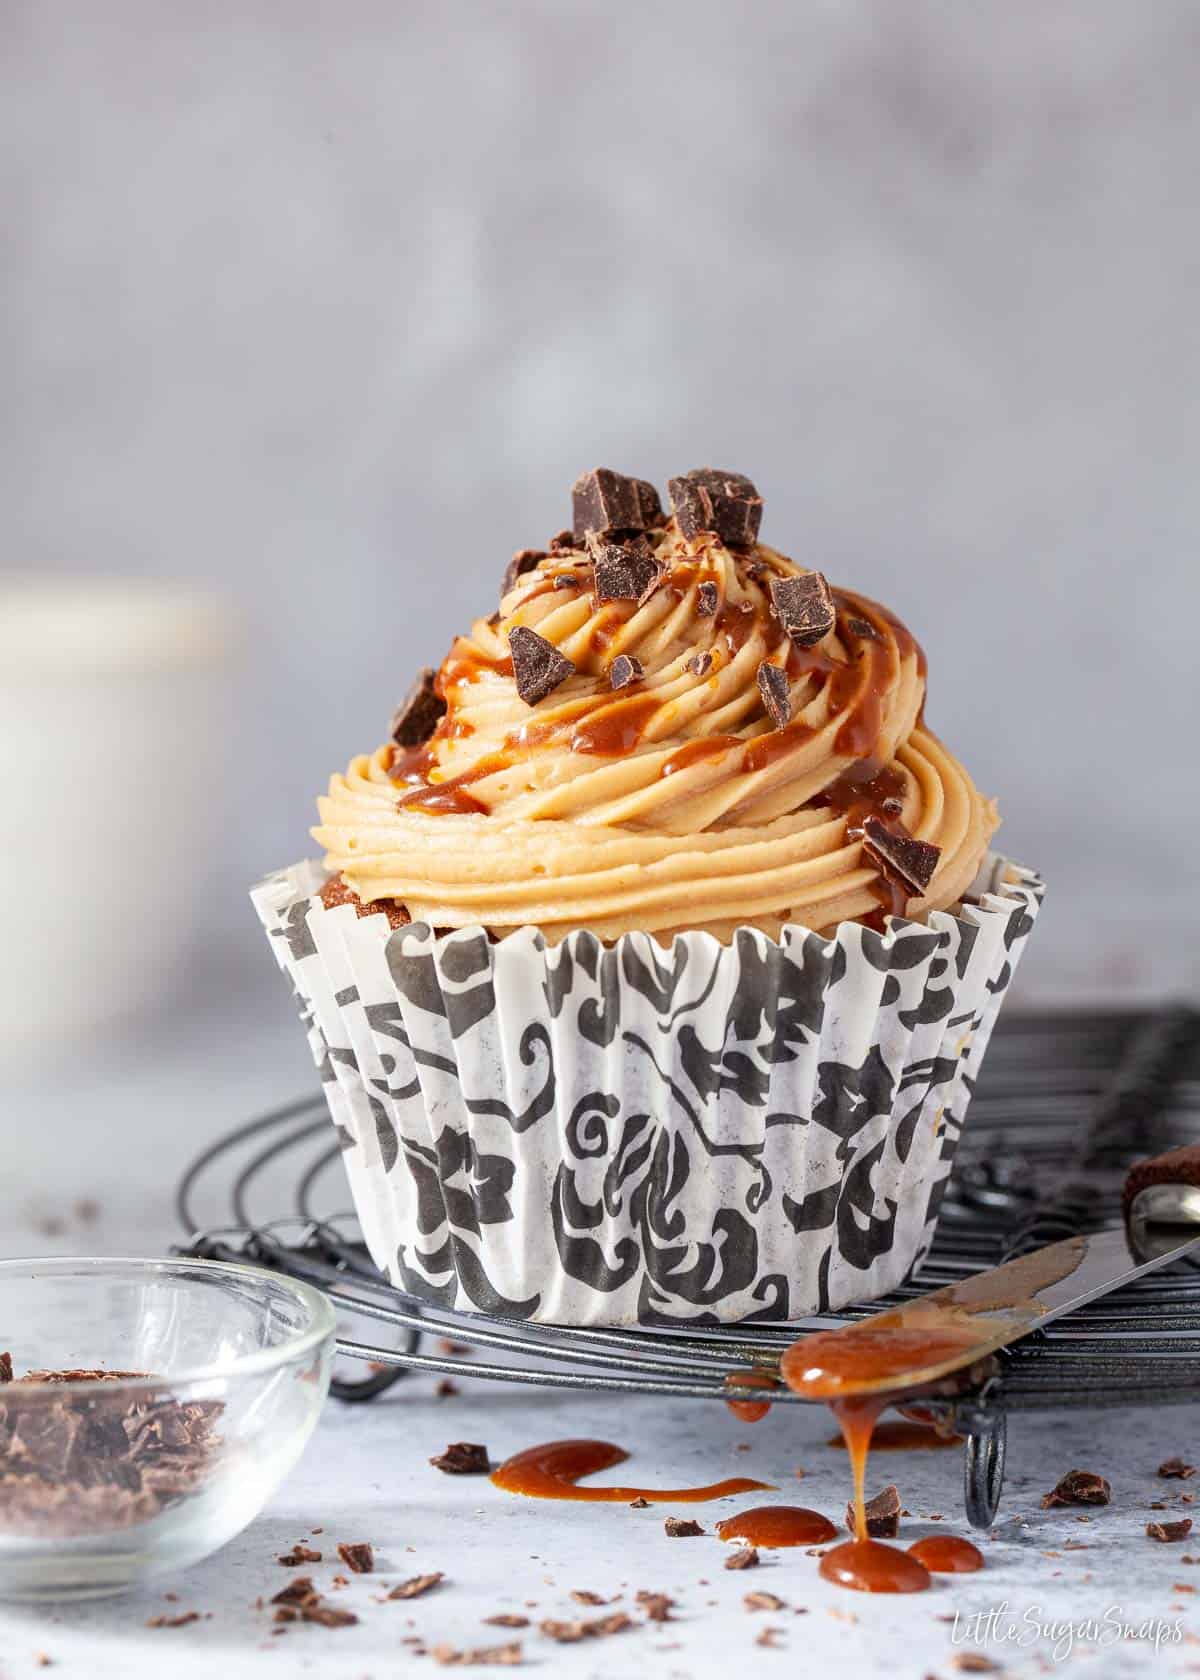 A small cake with coffee buttercream and coffee caramel drizzled on top.